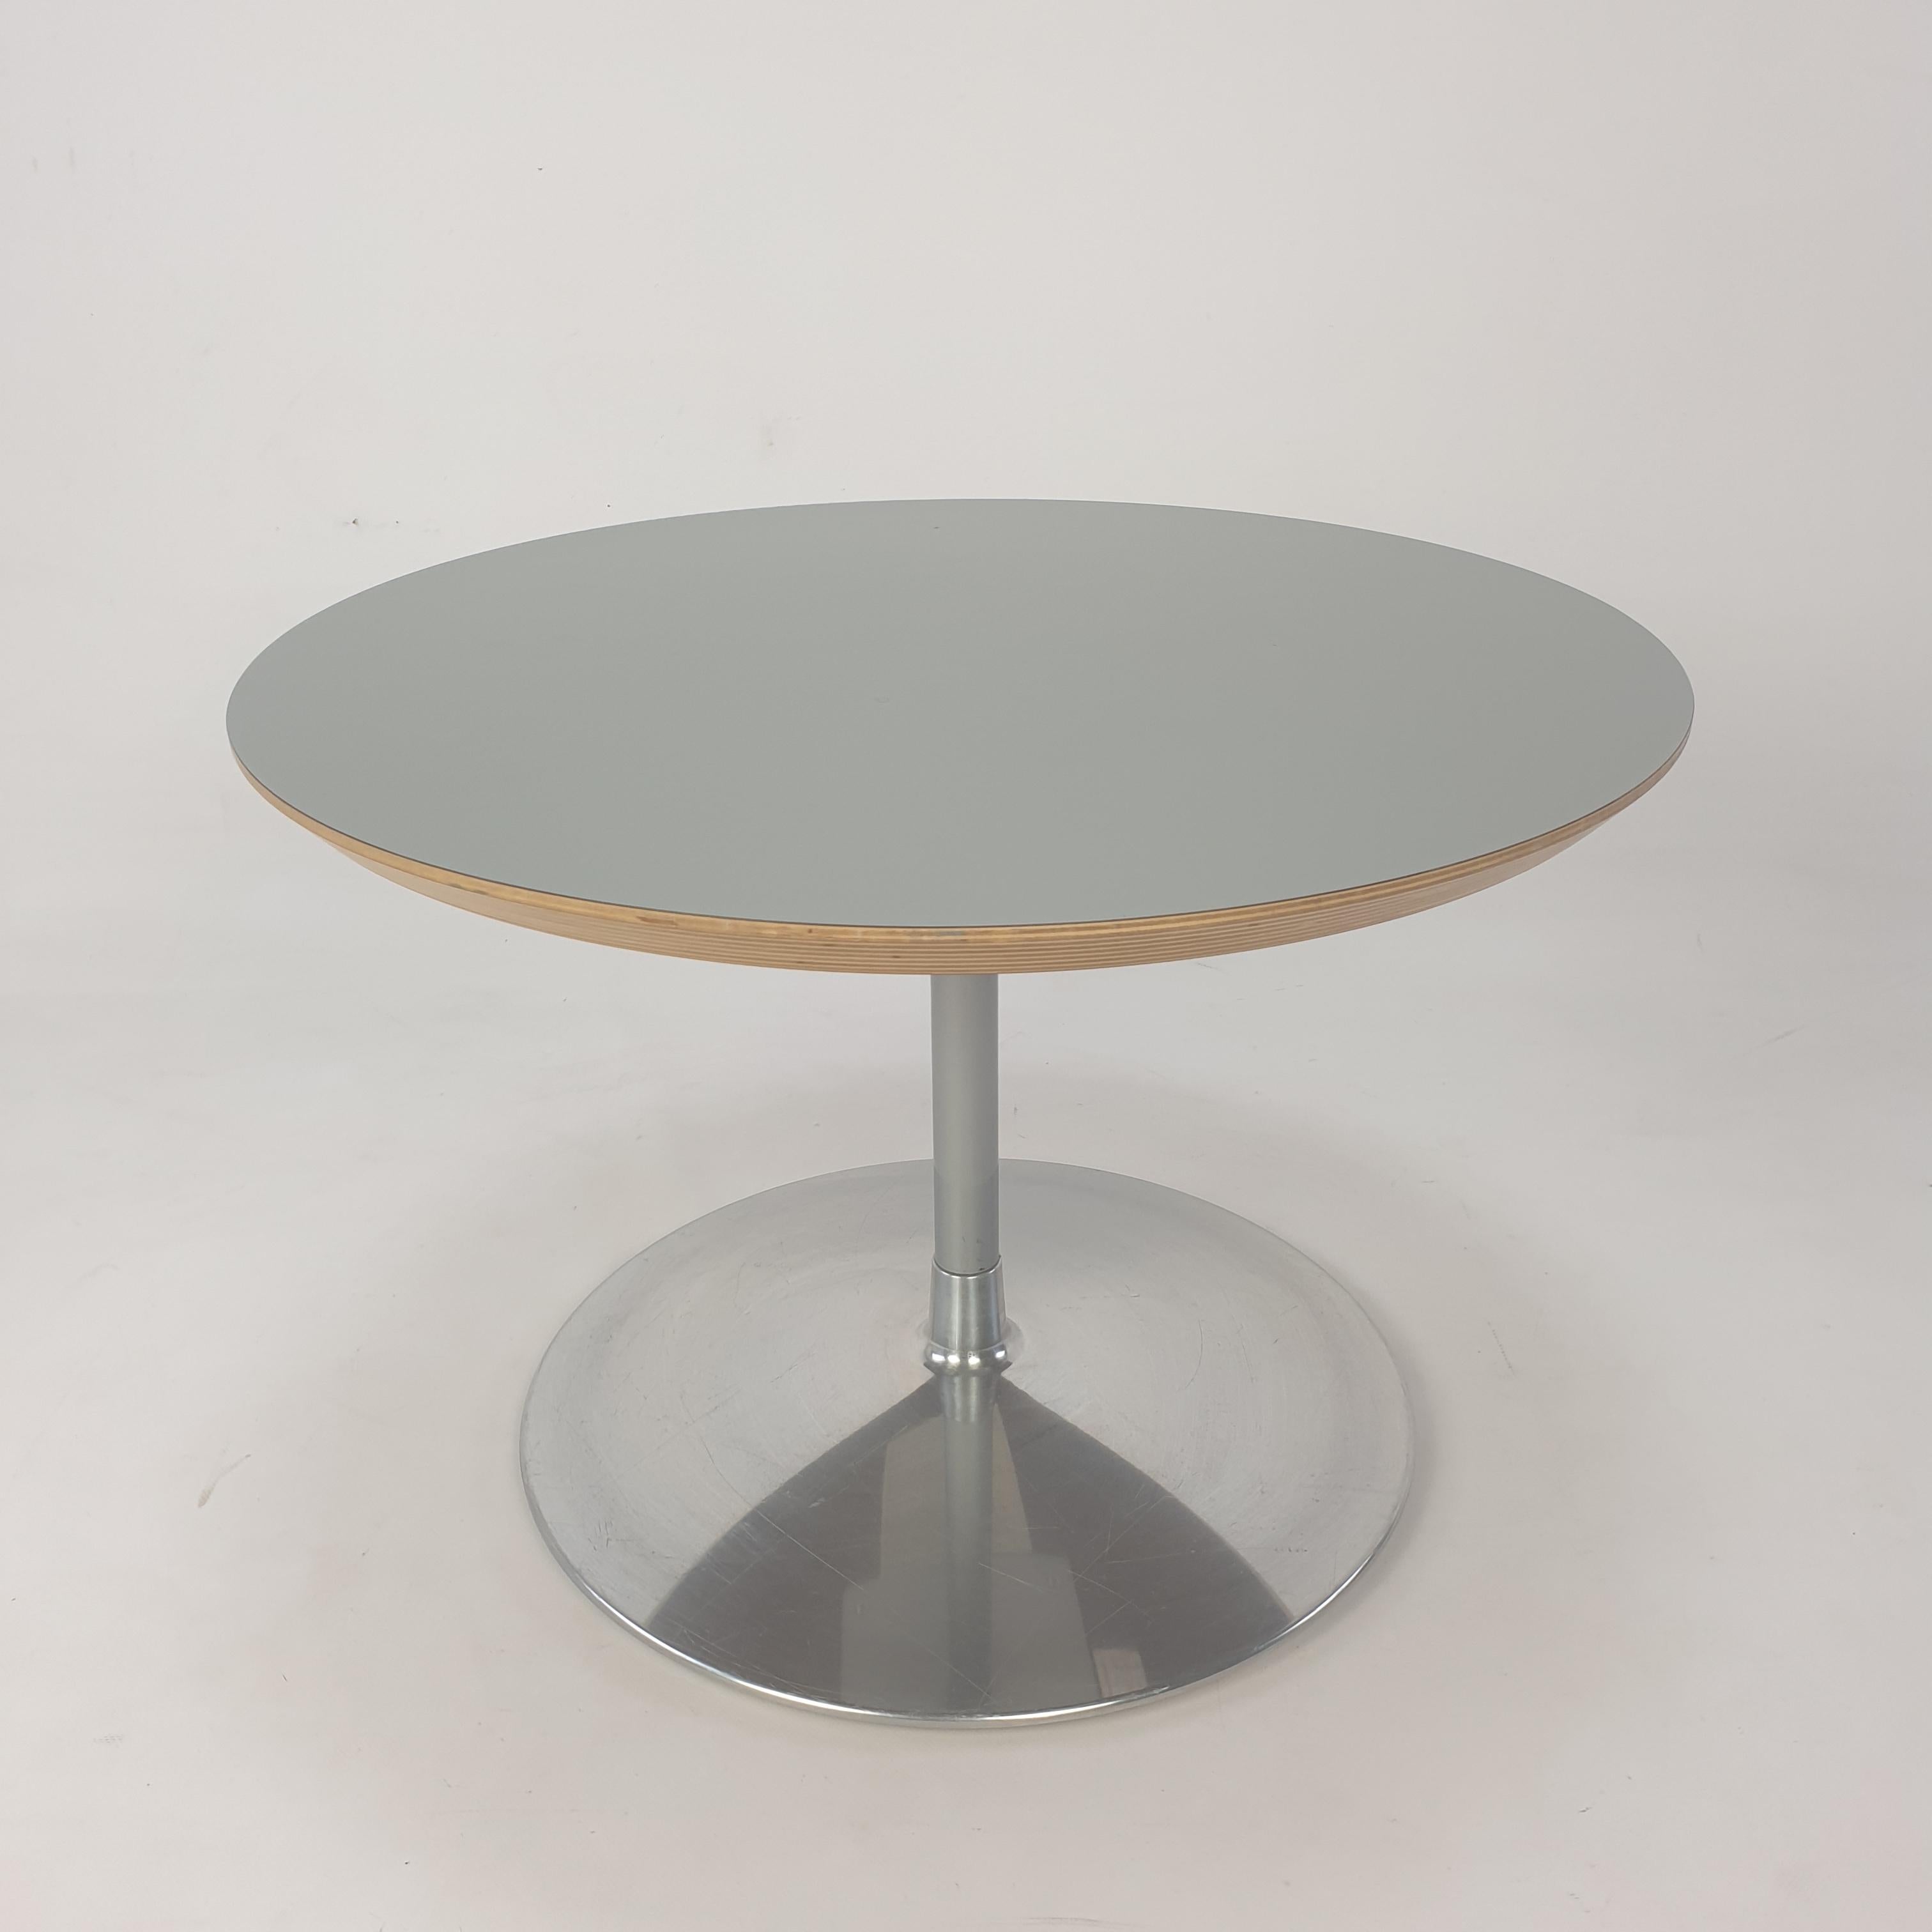 Very nice round coffee table, designed by Pierre Paulin in the 60's. 

The name of the table is 